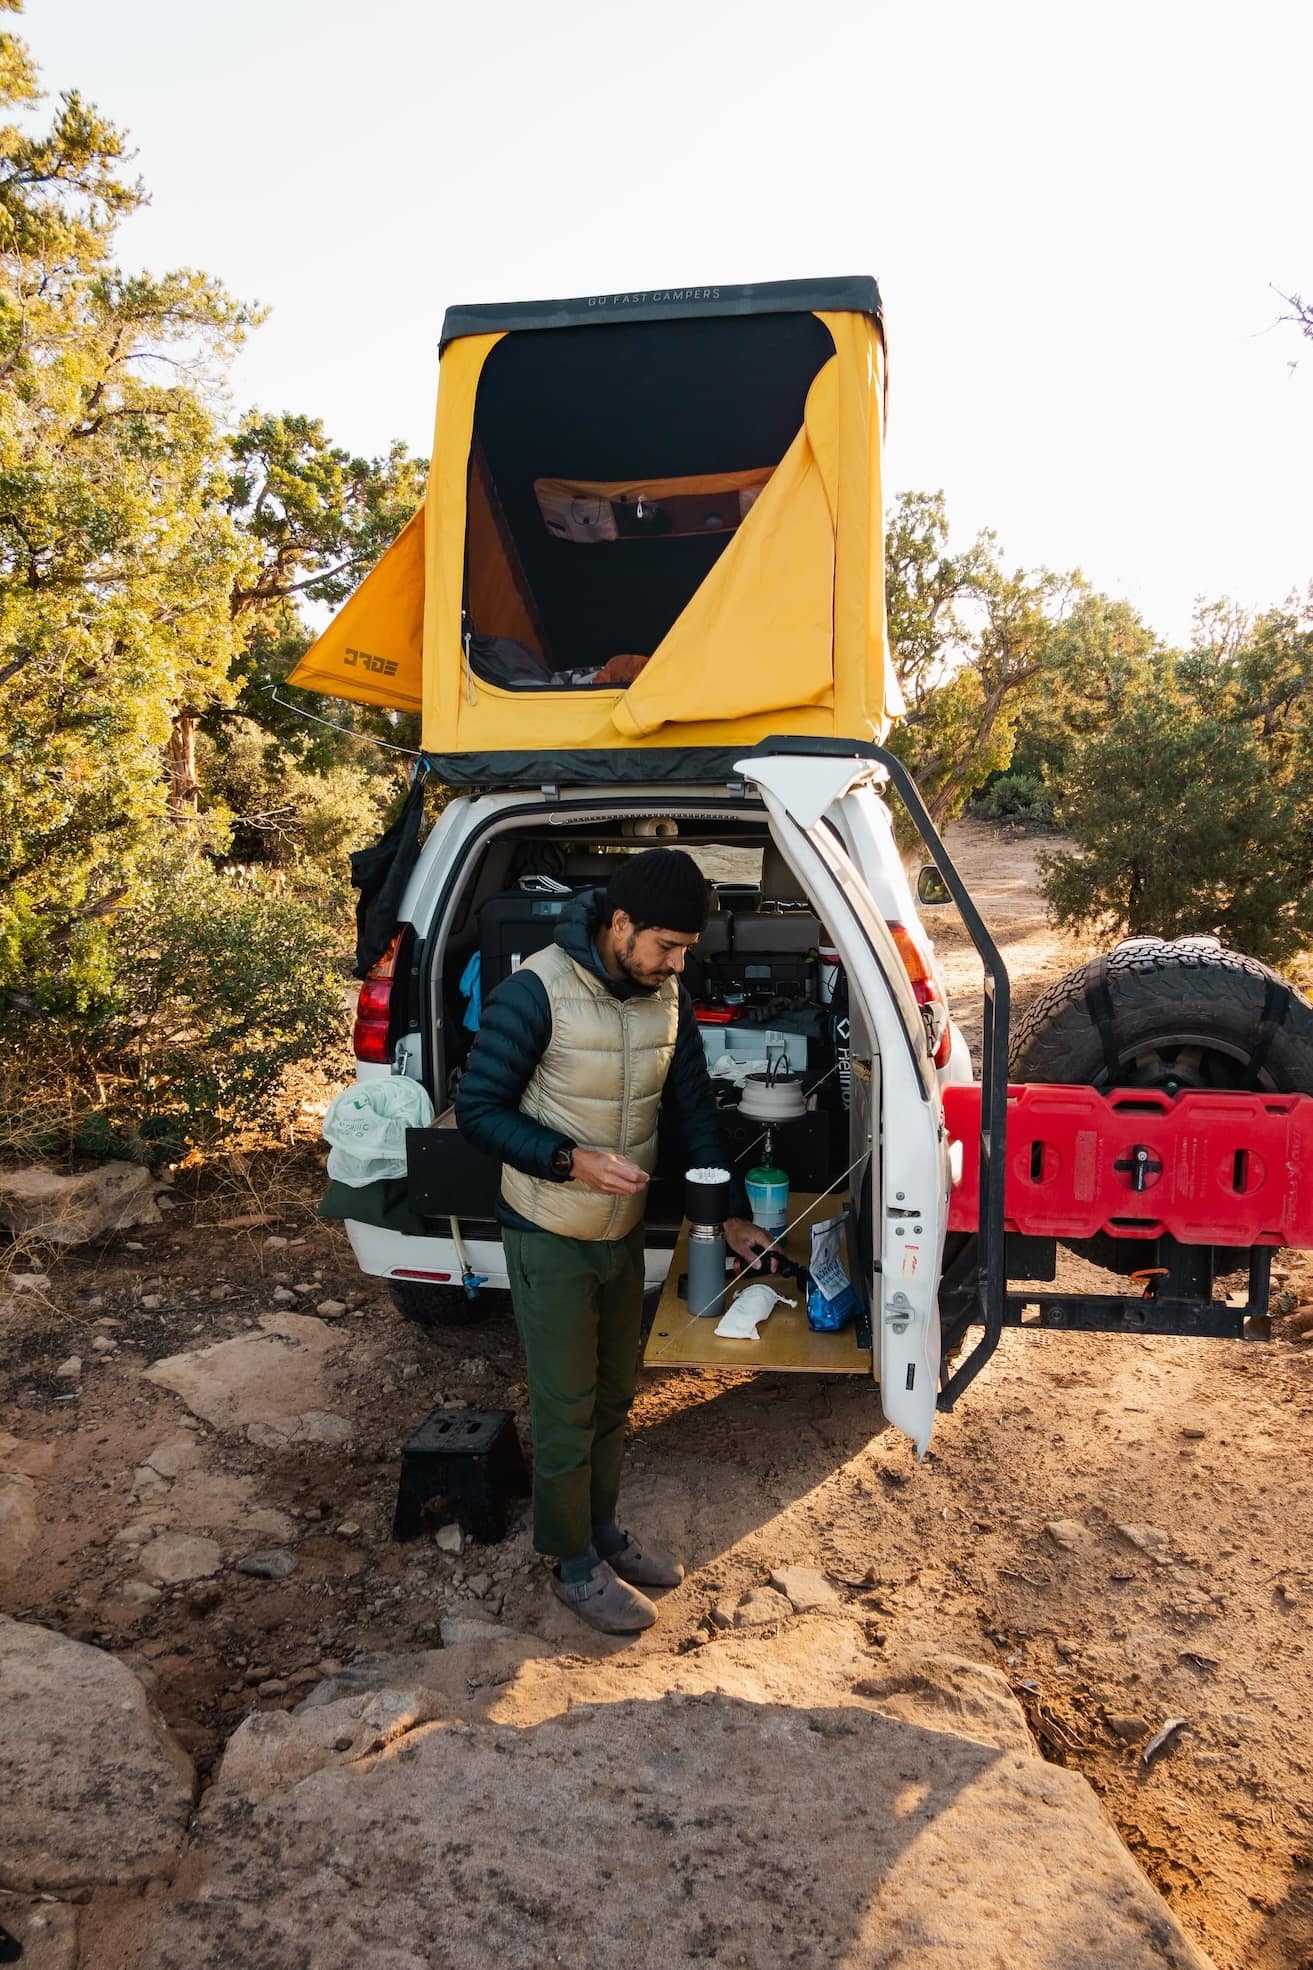 Naz makes coffee out of the back of a white SUV equipped with an open yellow rooftop tent and a rear kitchen setup, in a natural wooded campsite.